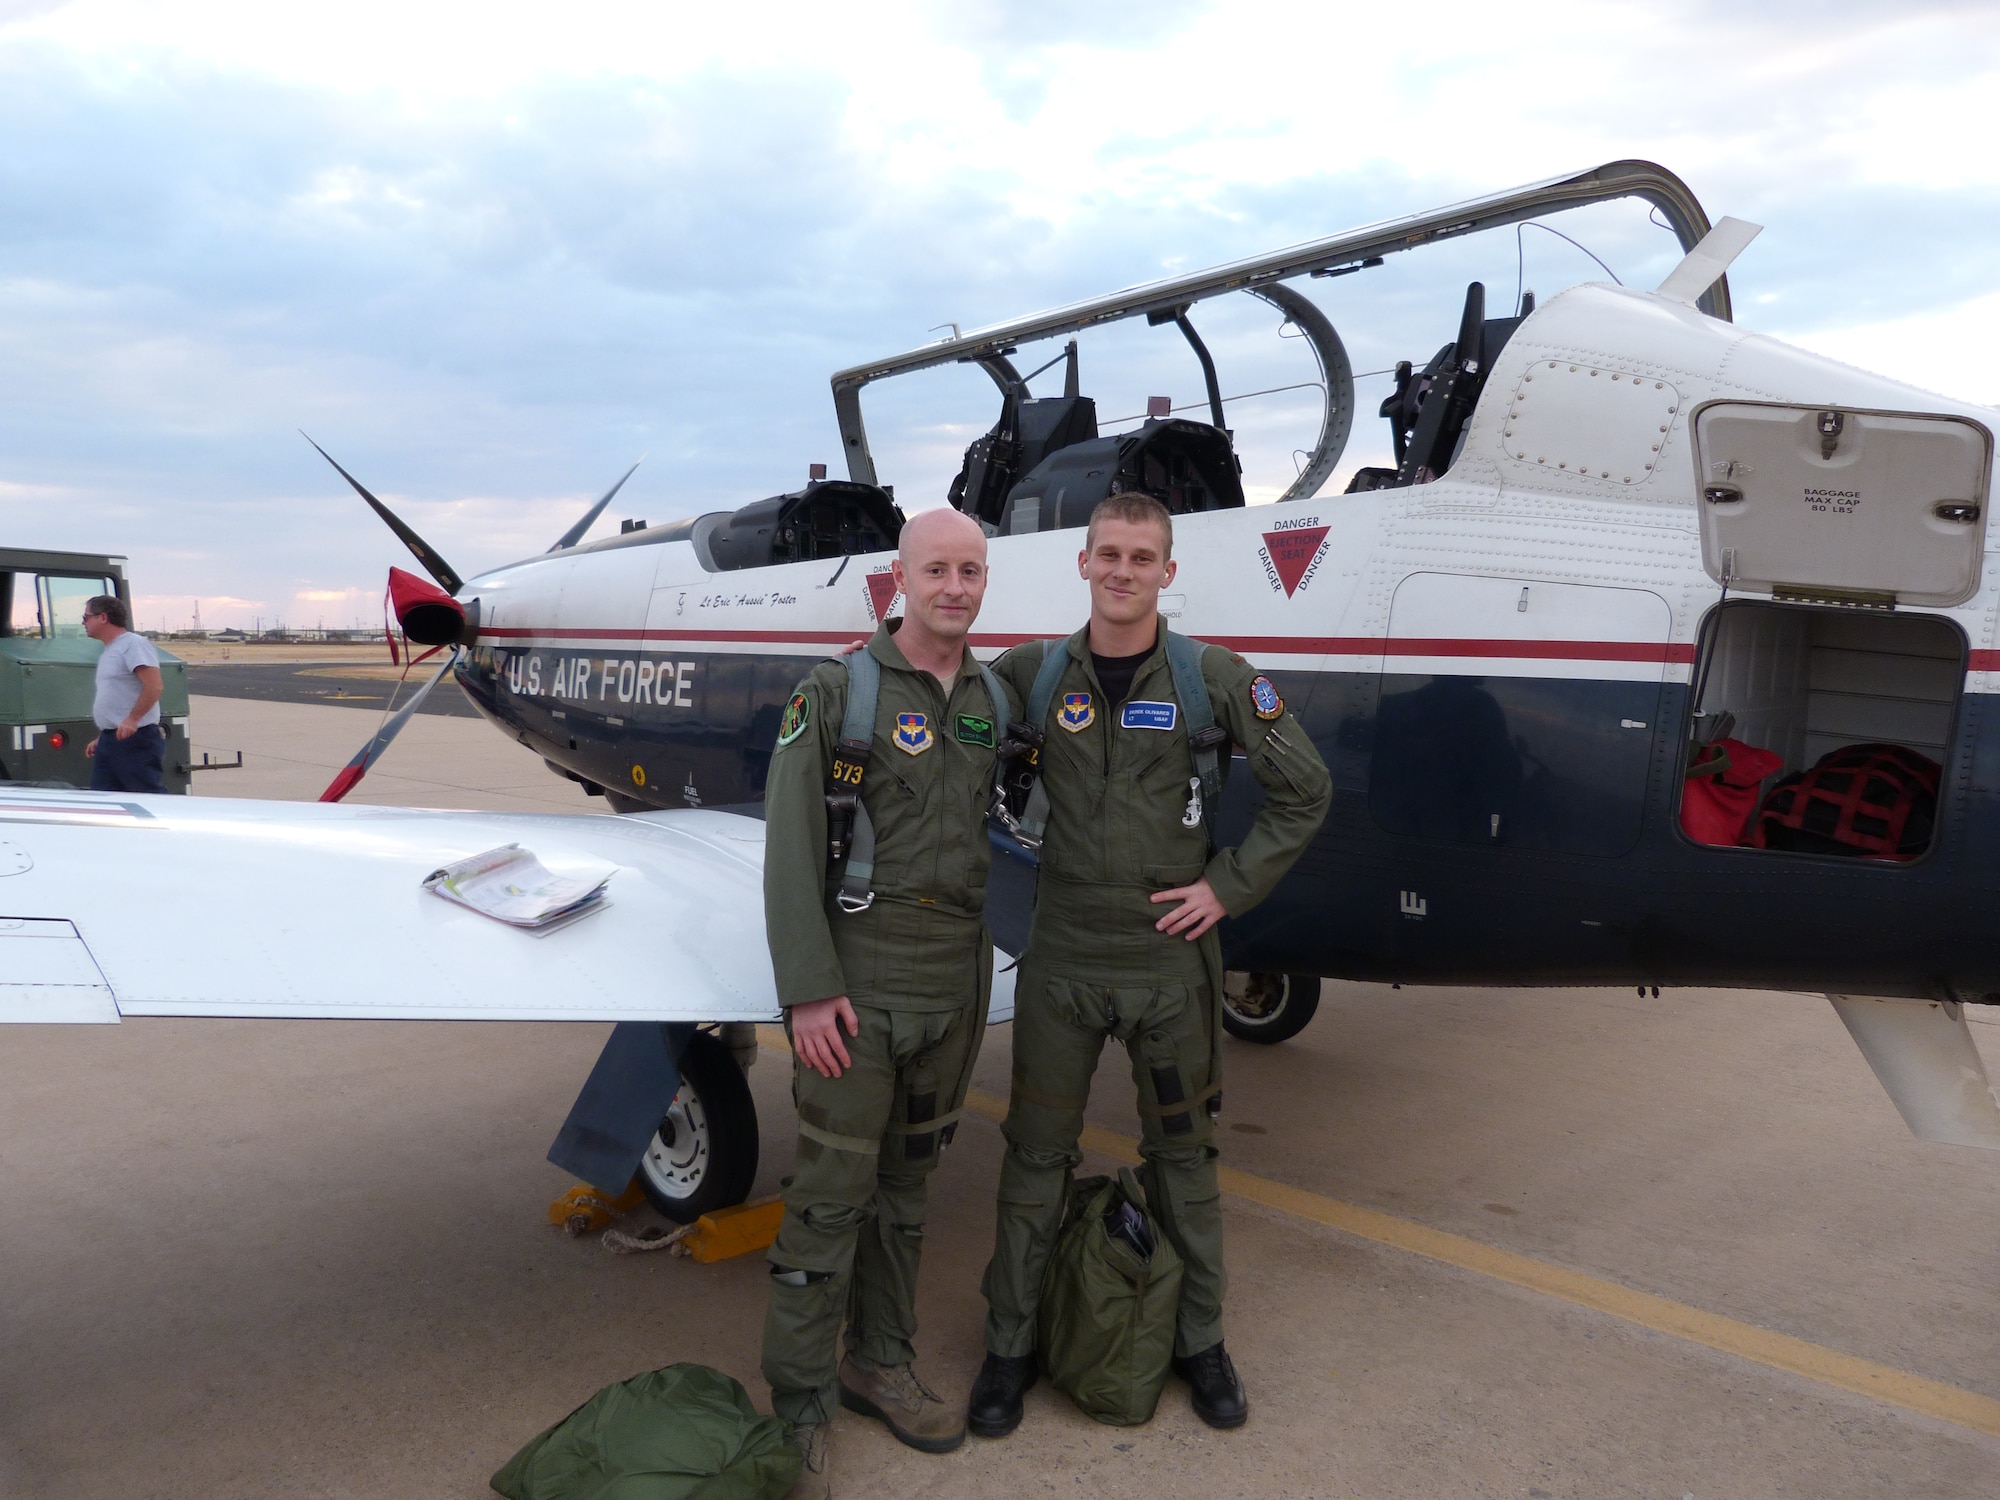 Capt. Frank Baumann, 459thFlying Training Squadron instructor pilot, and 2nd Lt. Derek Olivares, Euro-NATO Joint Jet Pilot Training student pilot, pose for a photo after expertly landing the stricken T-6 Texan II aircraft on Sept. 13. 